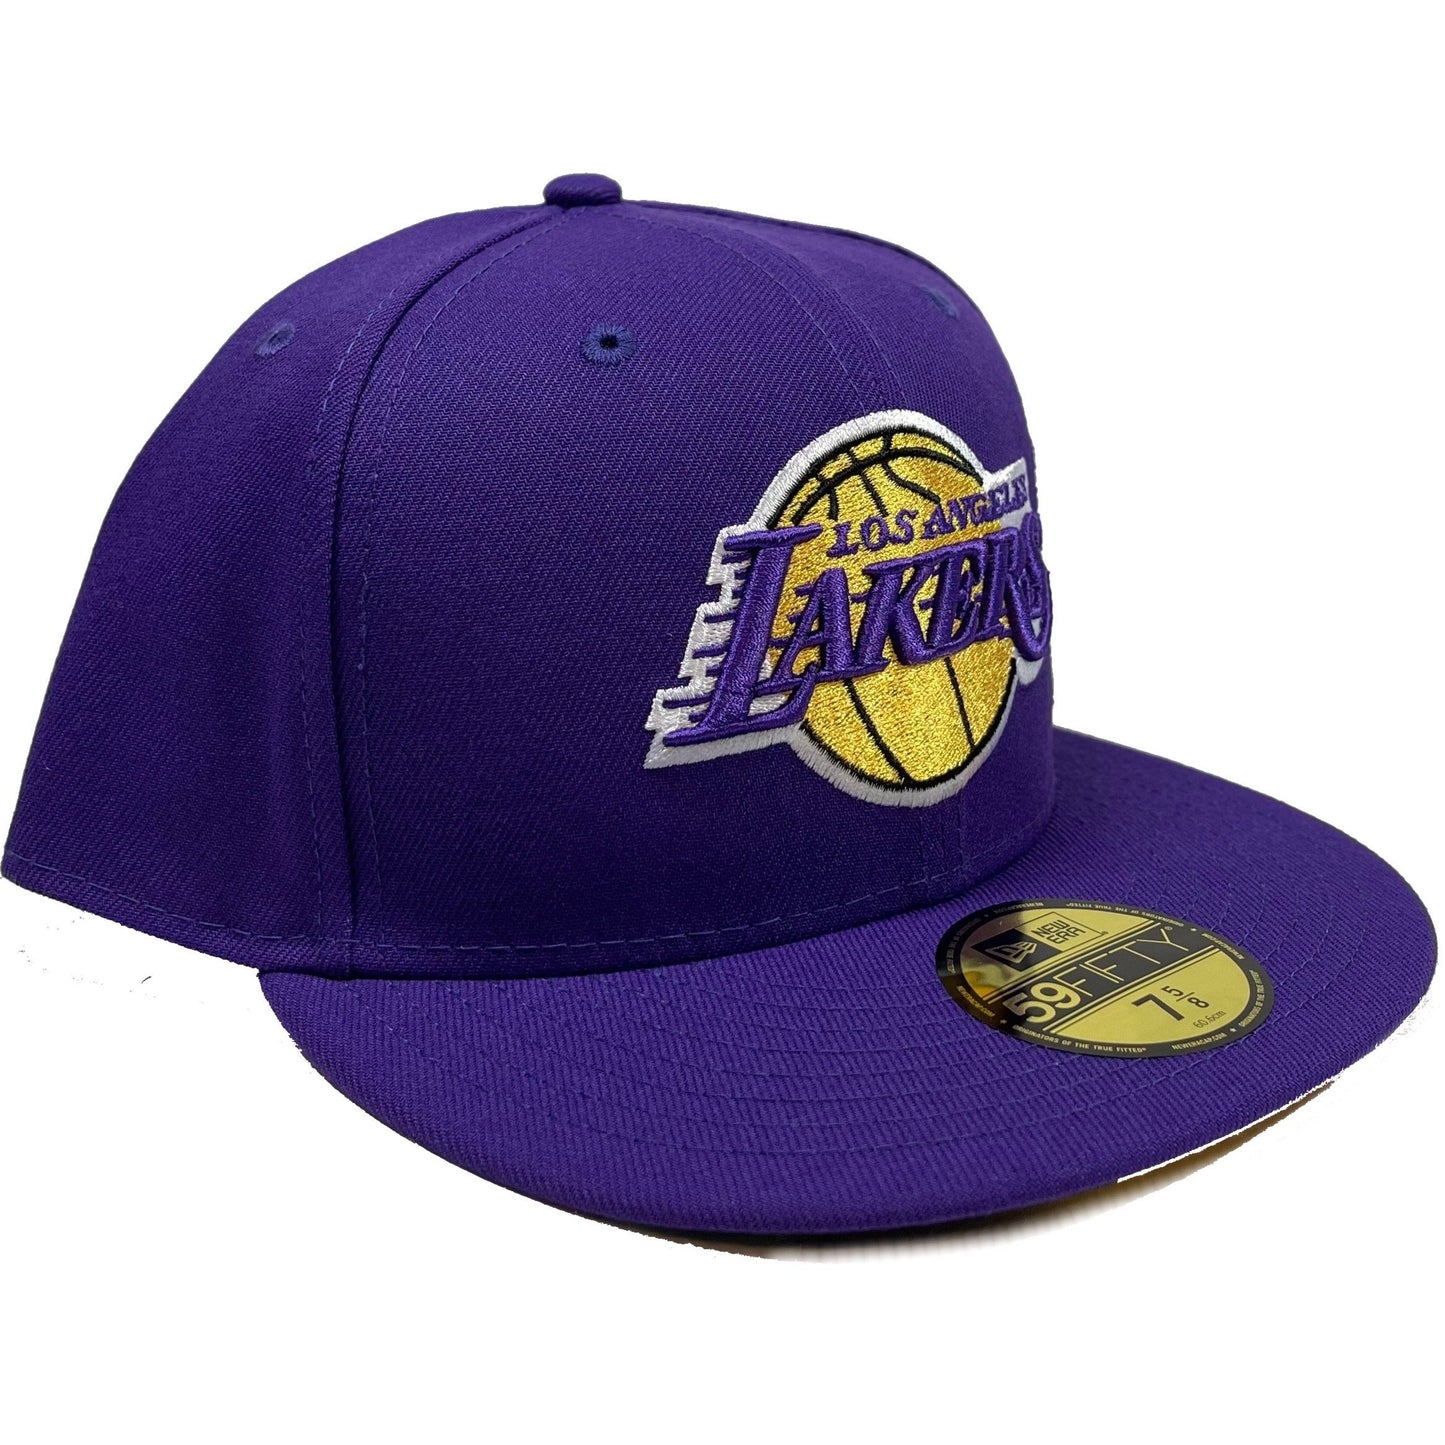 Los Angeles Lakers Patch (Purple) Fitted